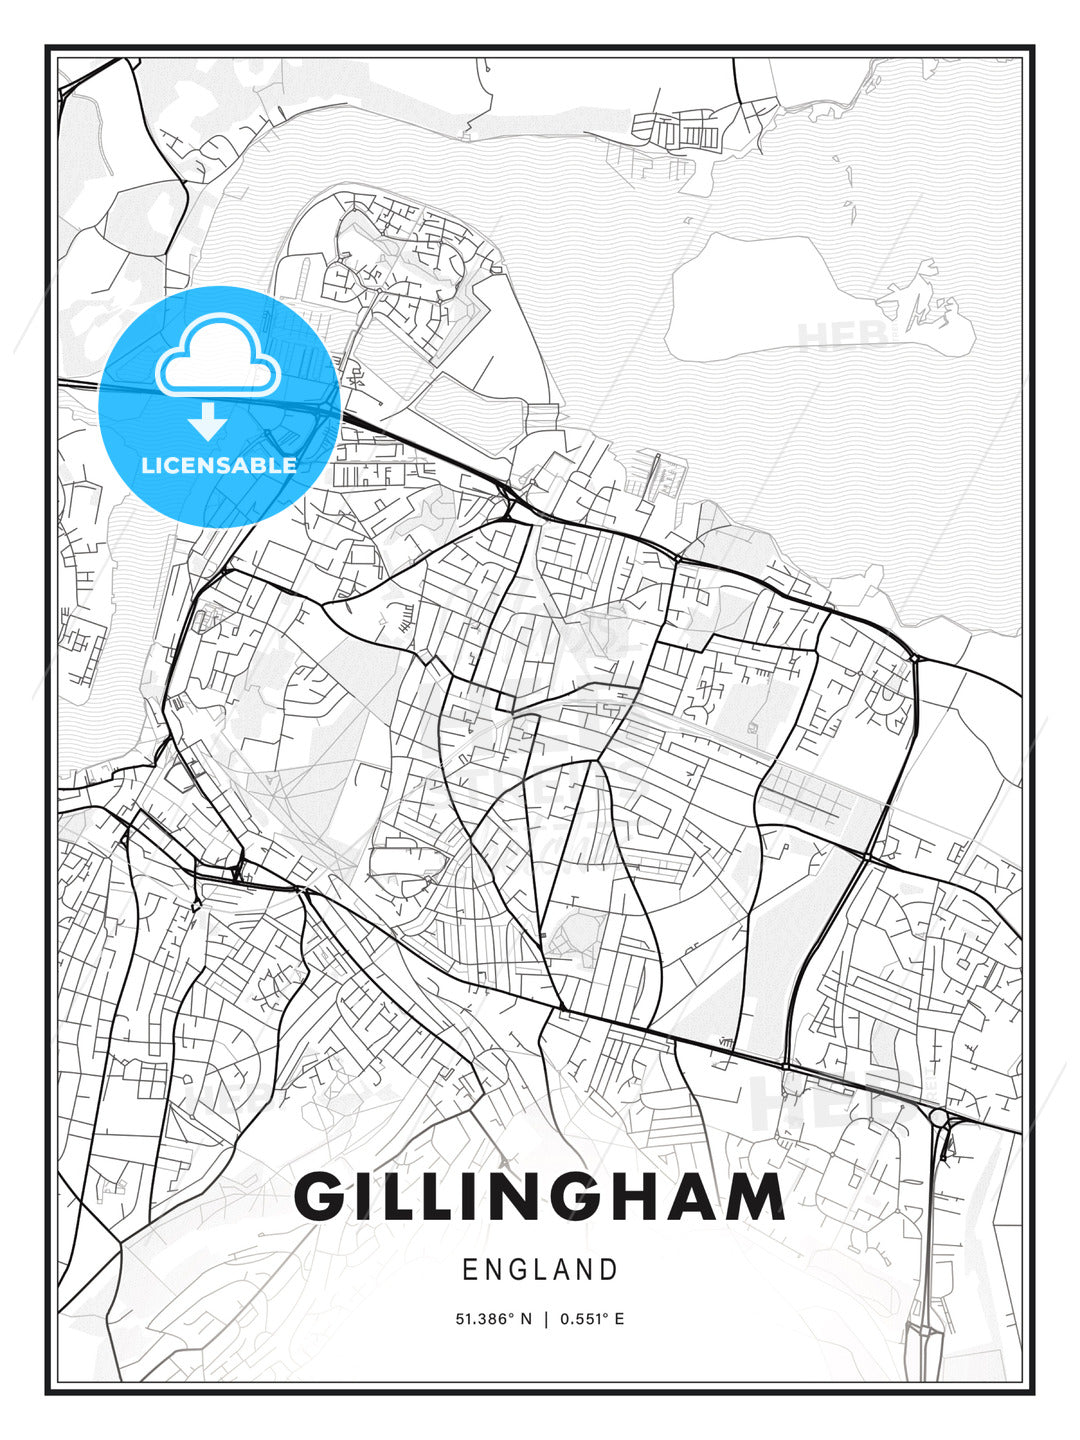 Gillingham, England, Modern Print Template in Various Formats - HEBSTREITS Sketches